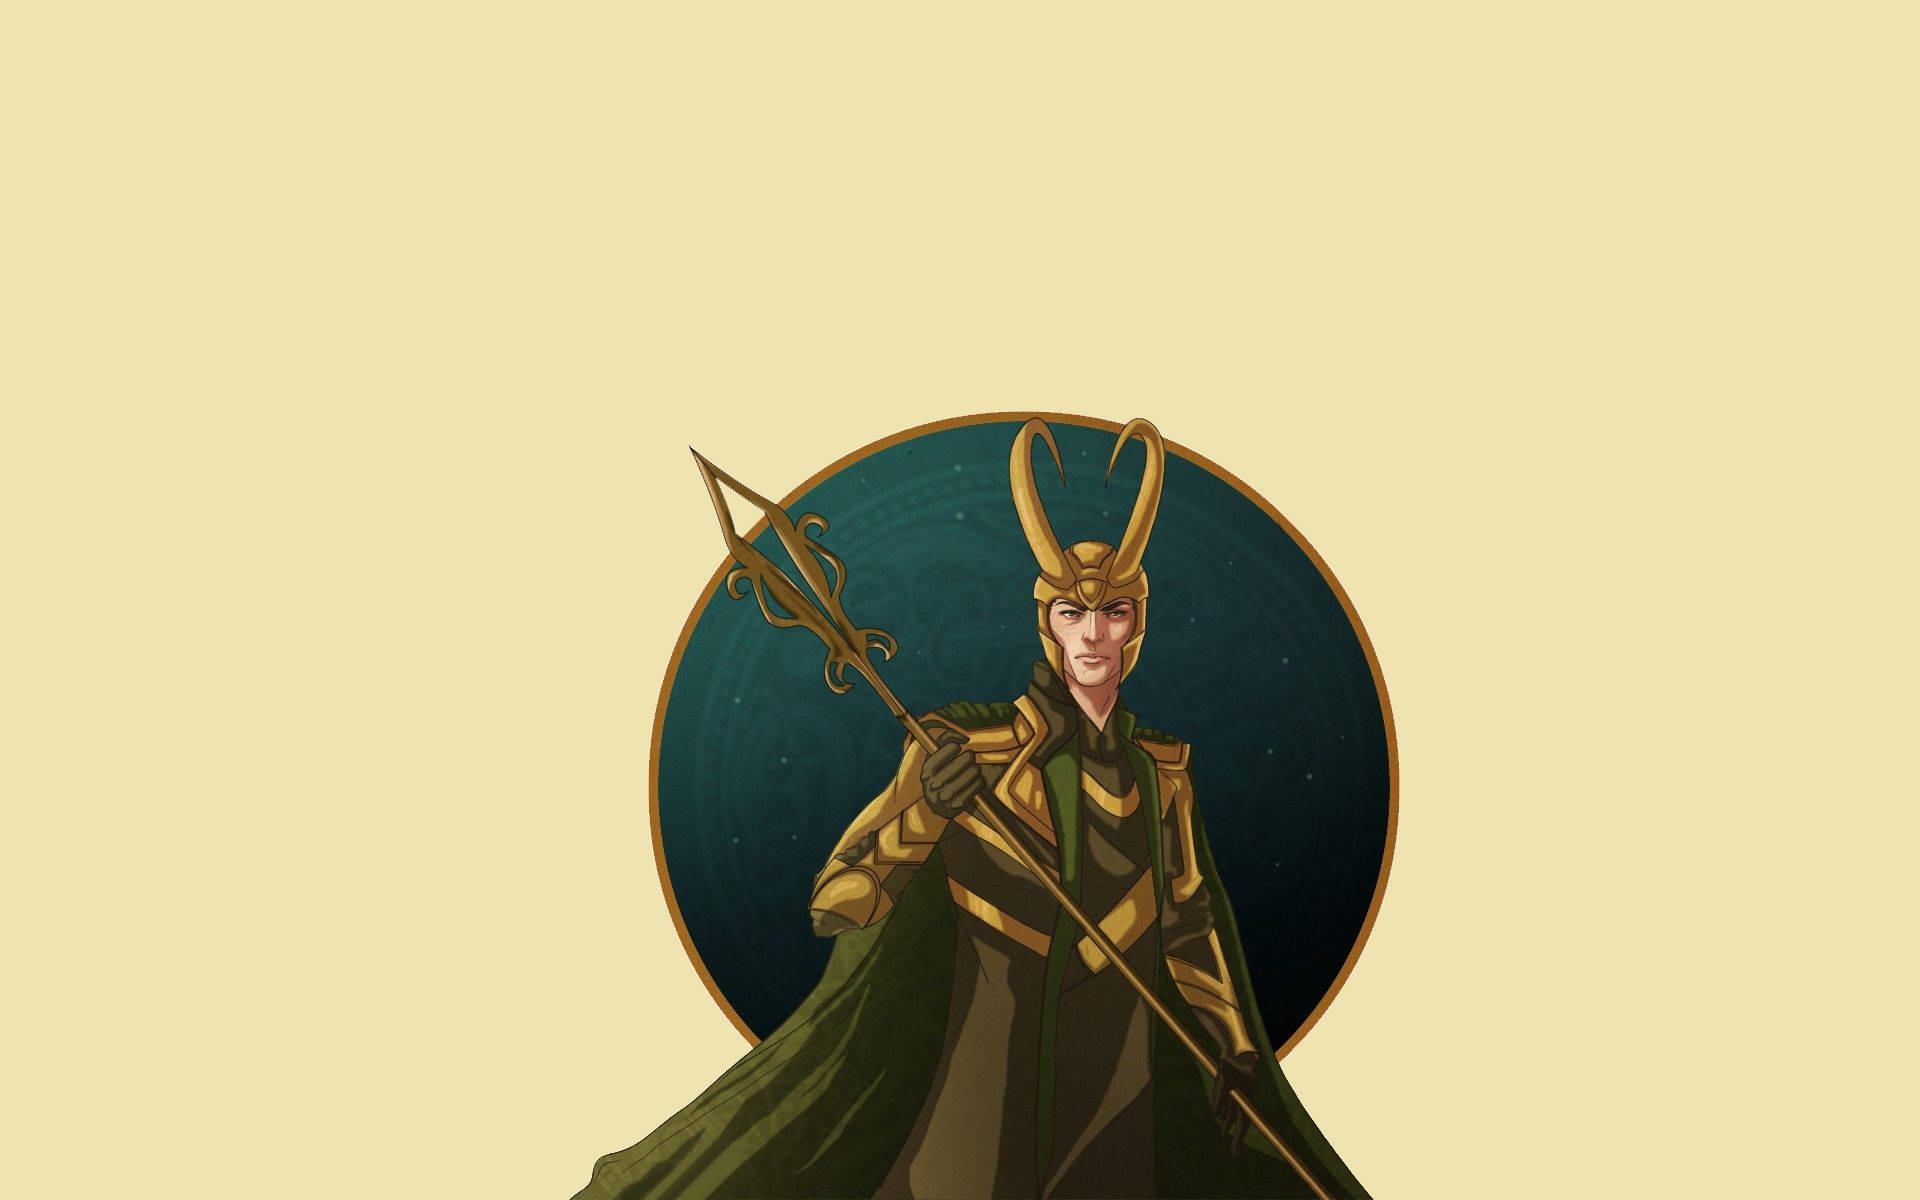 Bright colors and a mischievous smirk come together in this Loki Cartoon Artwork. Wallpaper